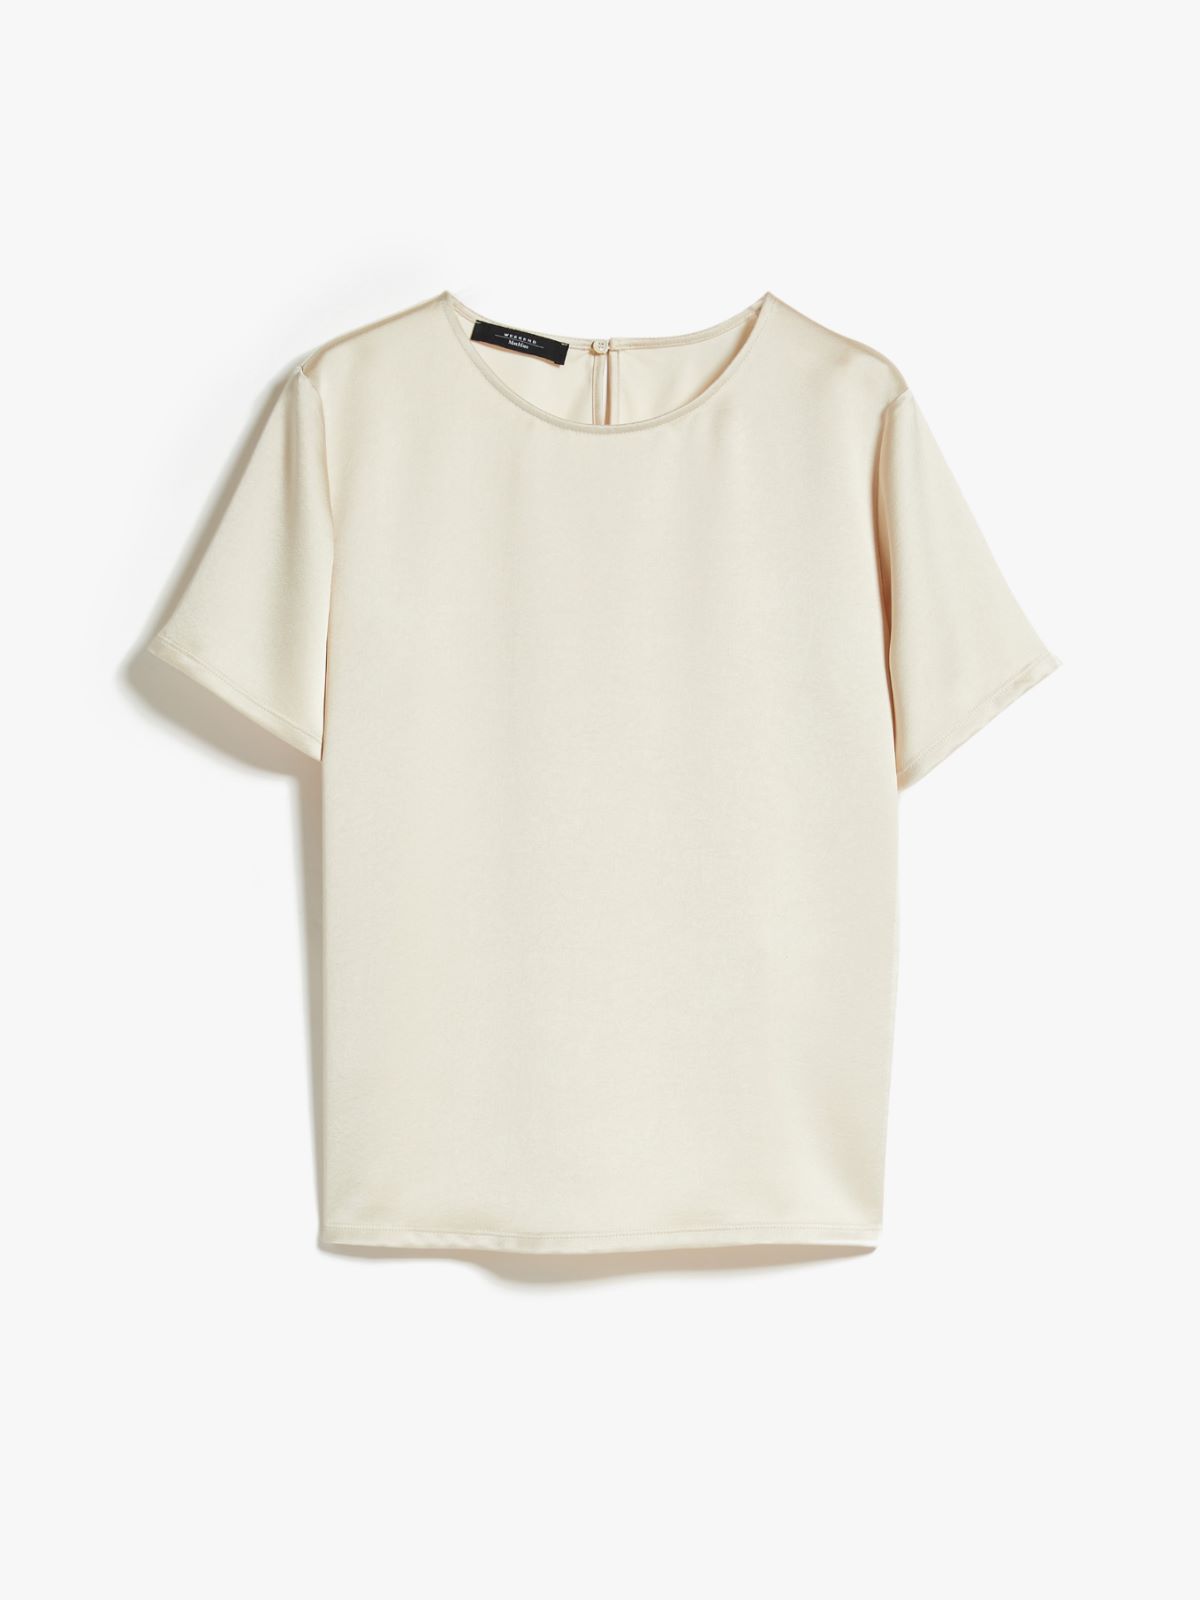 Blouse in satin and jersey - IVORY - Weekend Max Mara - 6